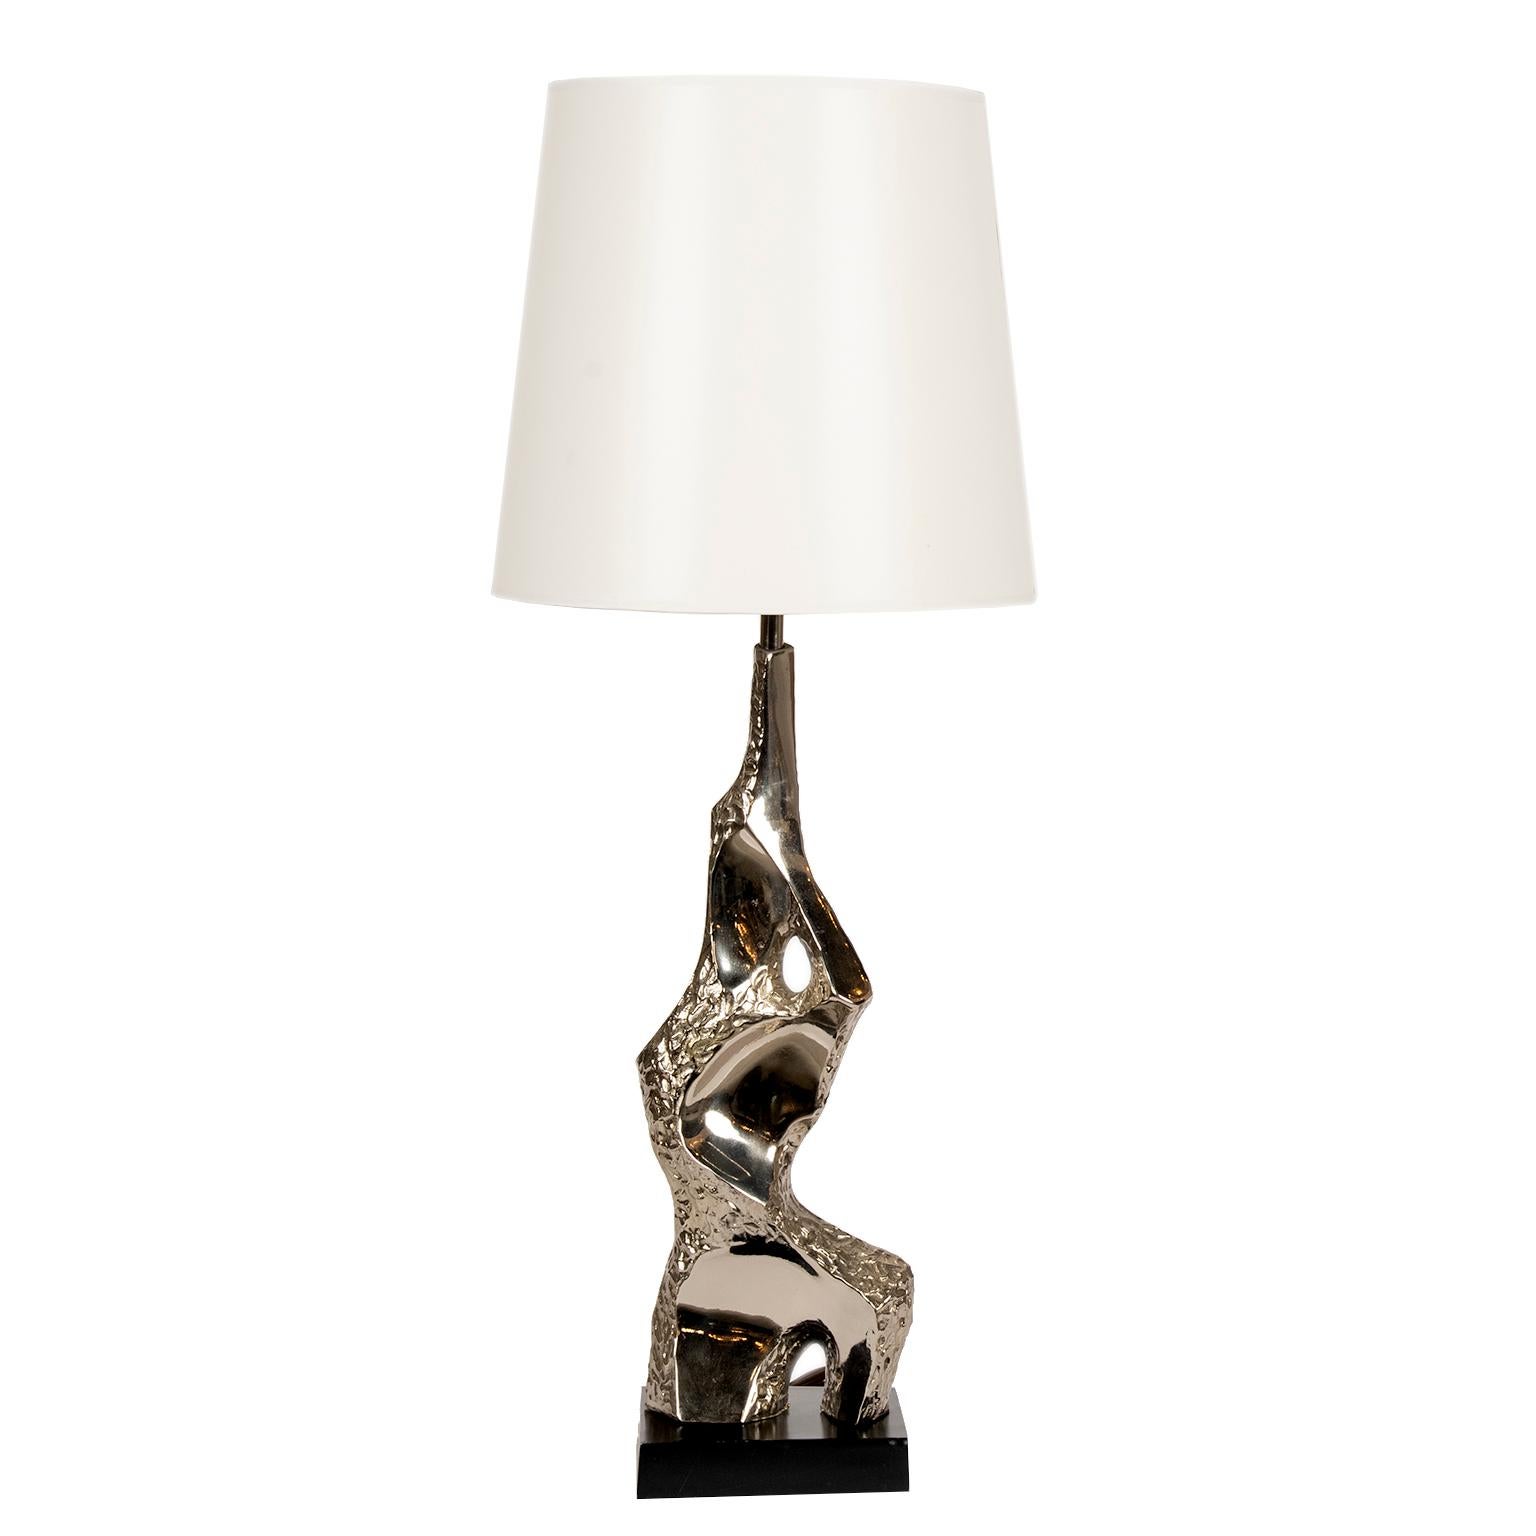 This beautiful tall lamp is as much functional as it is a piece of sculpture.
It features a matte black metal base with a hammered and molded bright chrome body.
This lamp appeared in the Laurel Lamp Company (USA) catalogue in 1965 and is designed